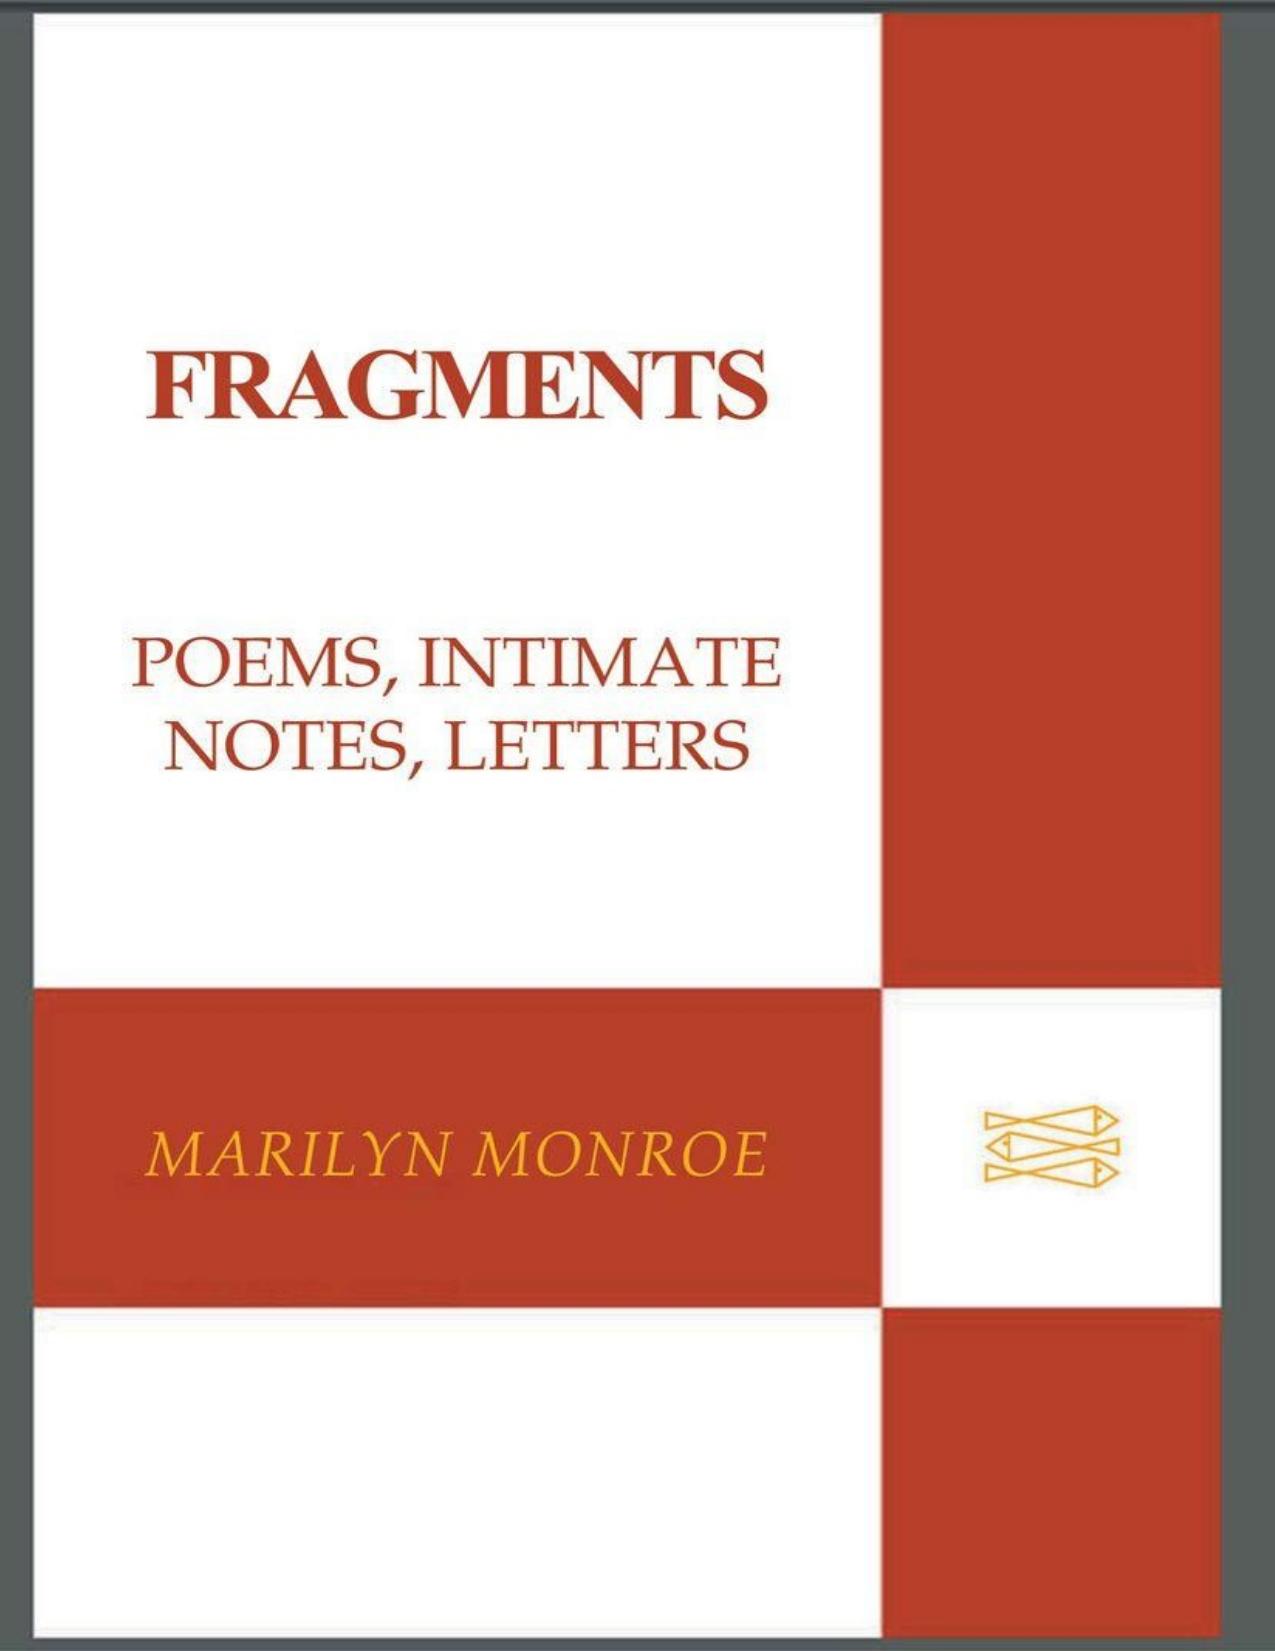 Fragments: Poems, Intimate Notes, Letters by Marilyn Monroe & Bernard Comment & Stanley Buchthal